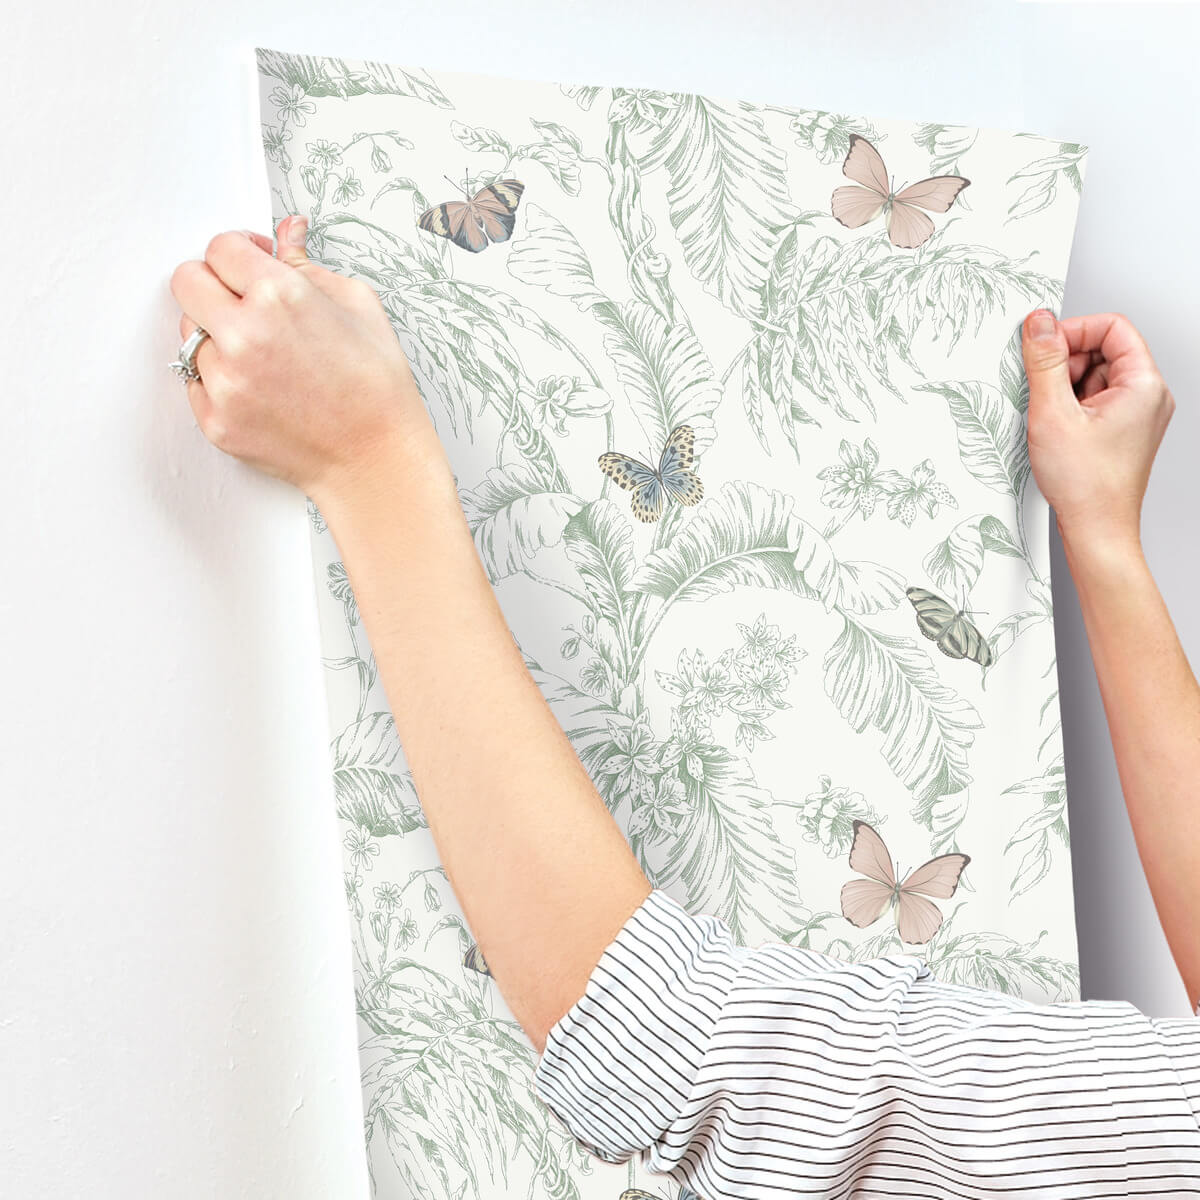 Toile Resource Library Papillon Wallpaper - Green